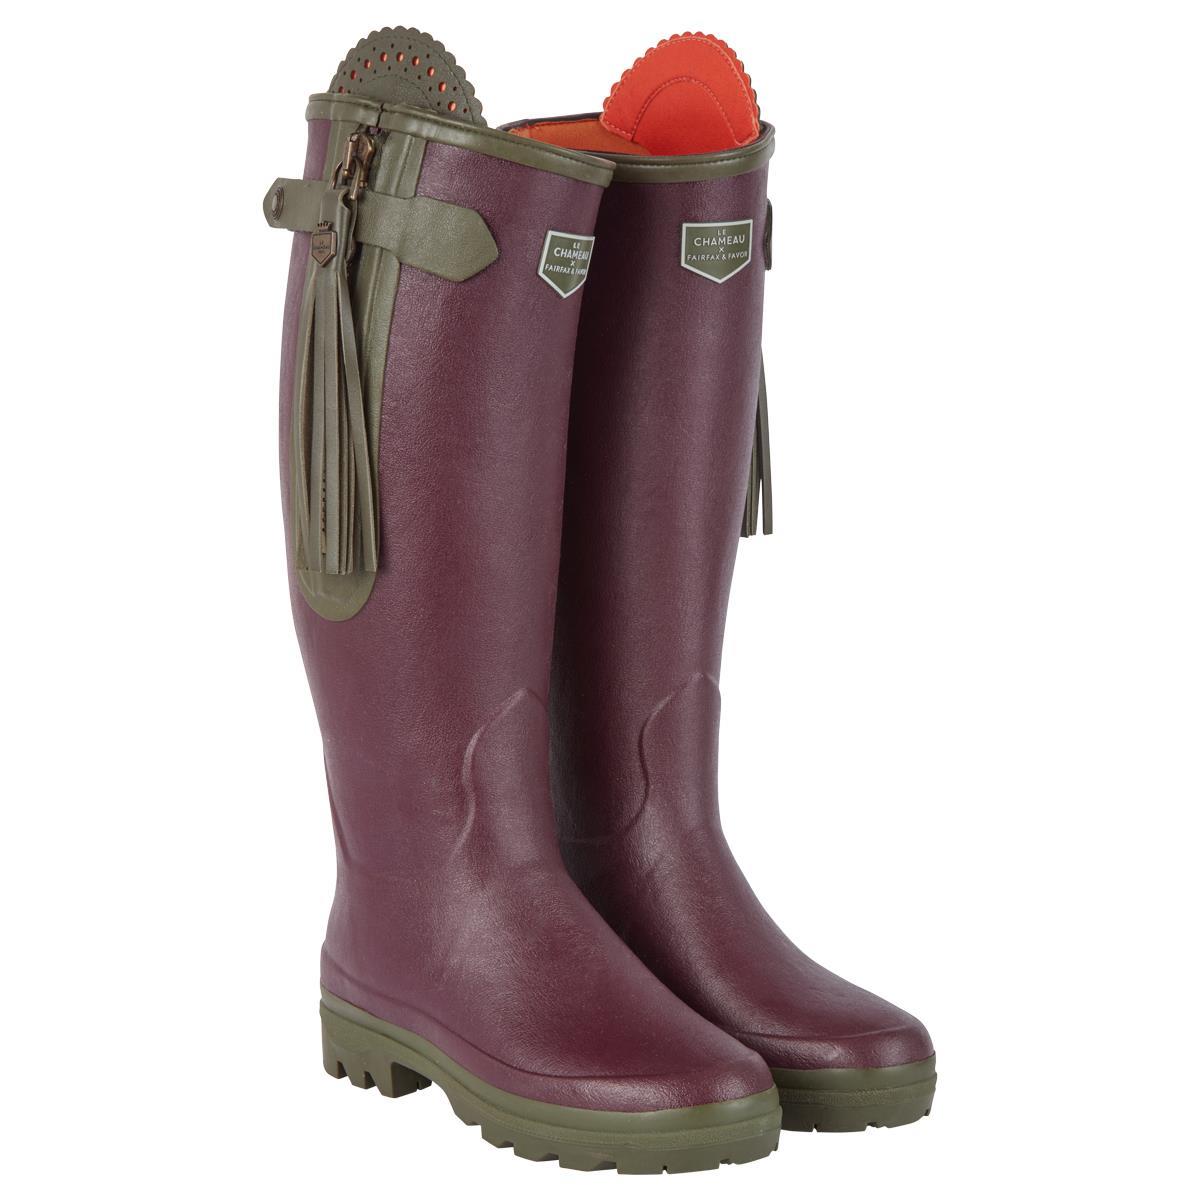 What is the design of the Fairfax and Favor wellies for easy removal?